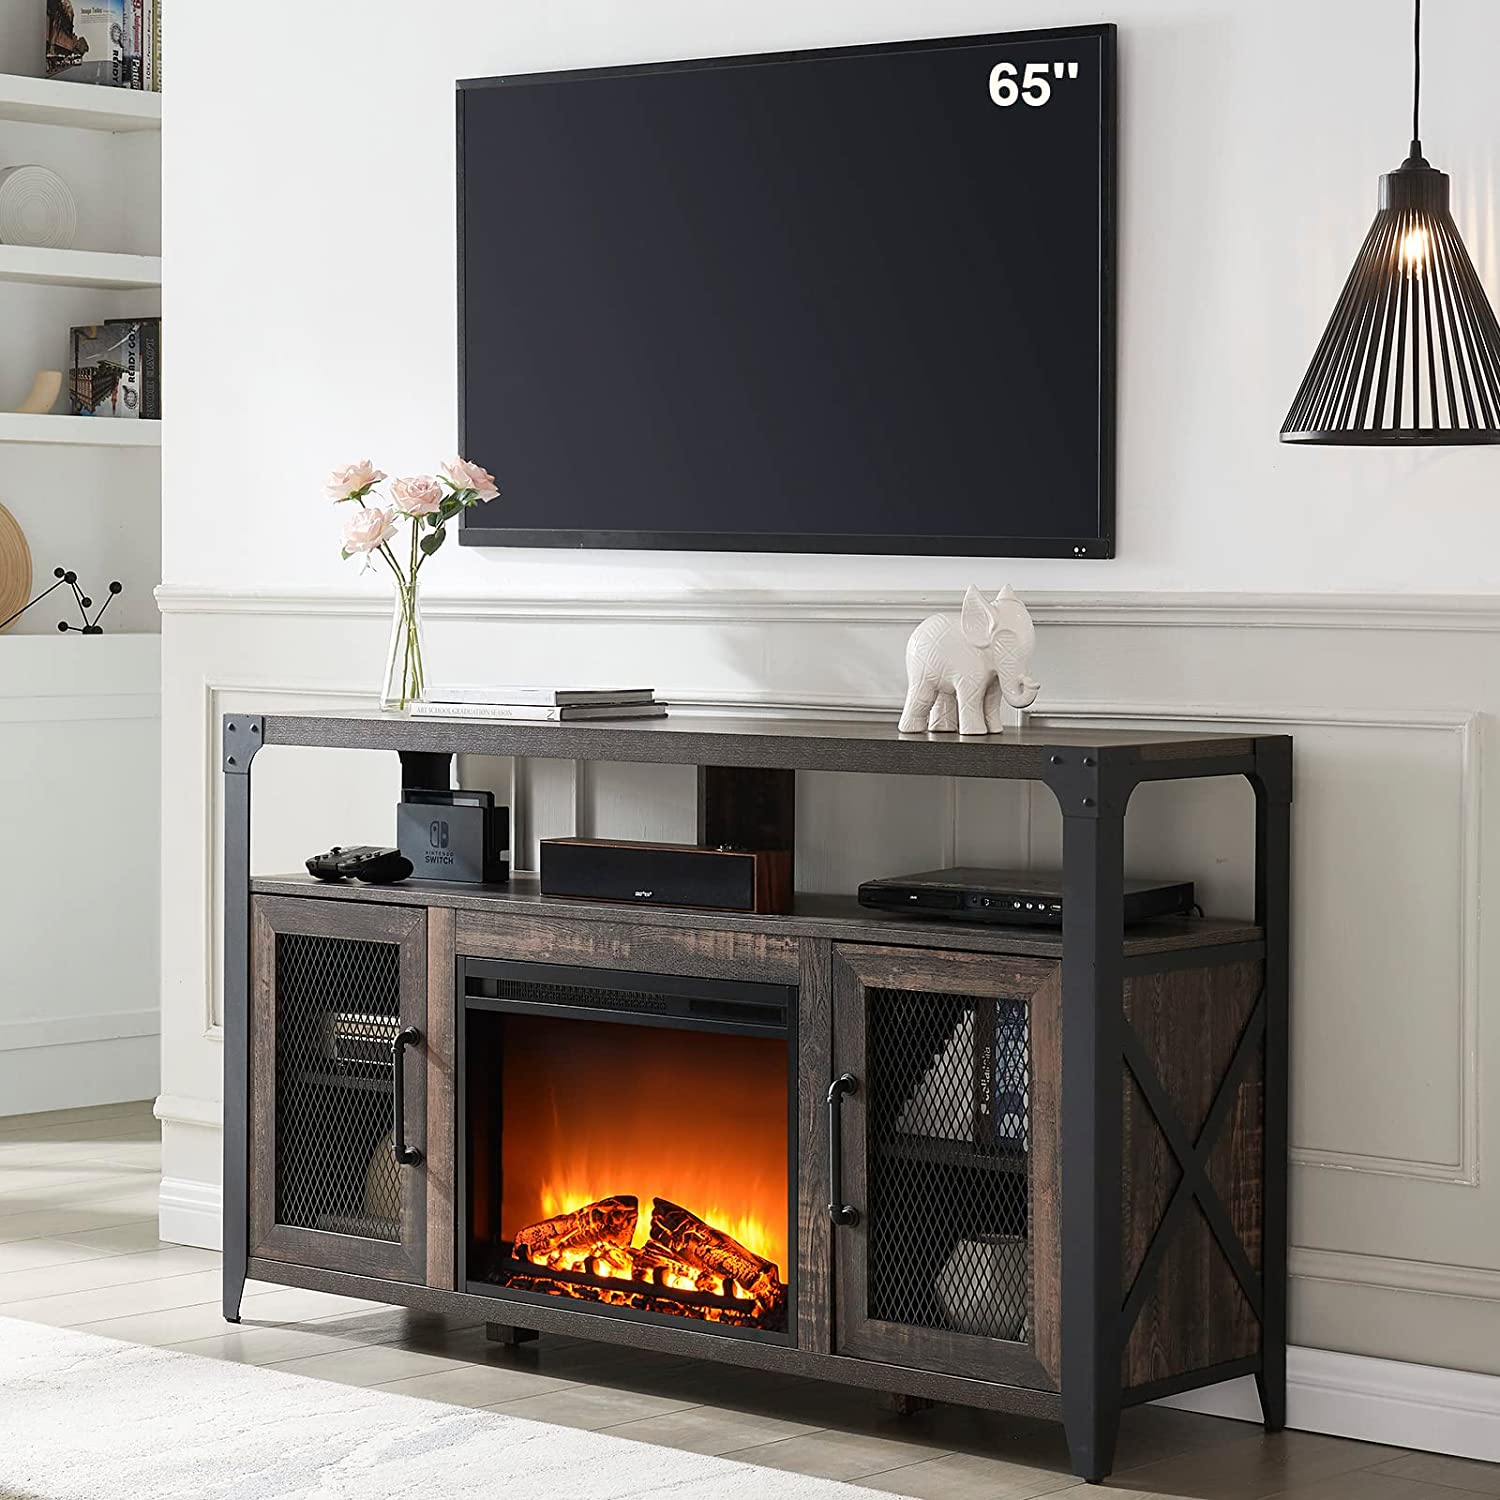 OKD Rustic Industrial Metal X-Frame Wooden Electric Fireplace & TV Stand